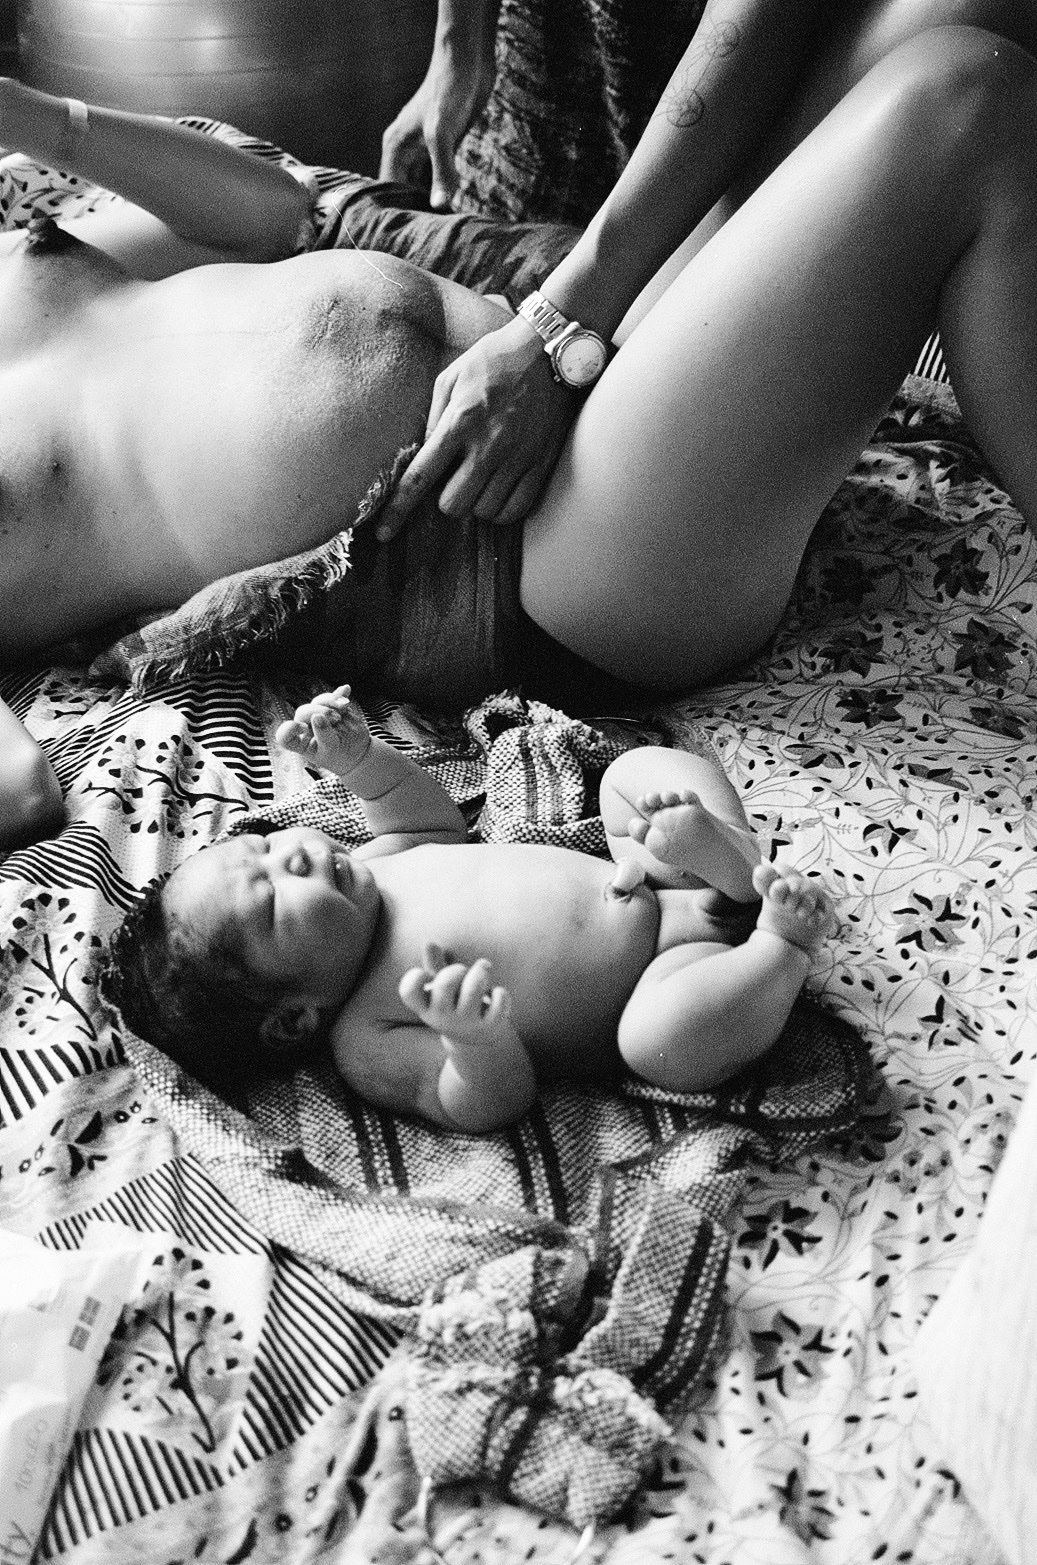 A black and white photo of a baby laying belly up in the foreground and what is speculated to be its mother in the background in the background, being wrapped up by a pair of hands that appear from the top right corner of the image.